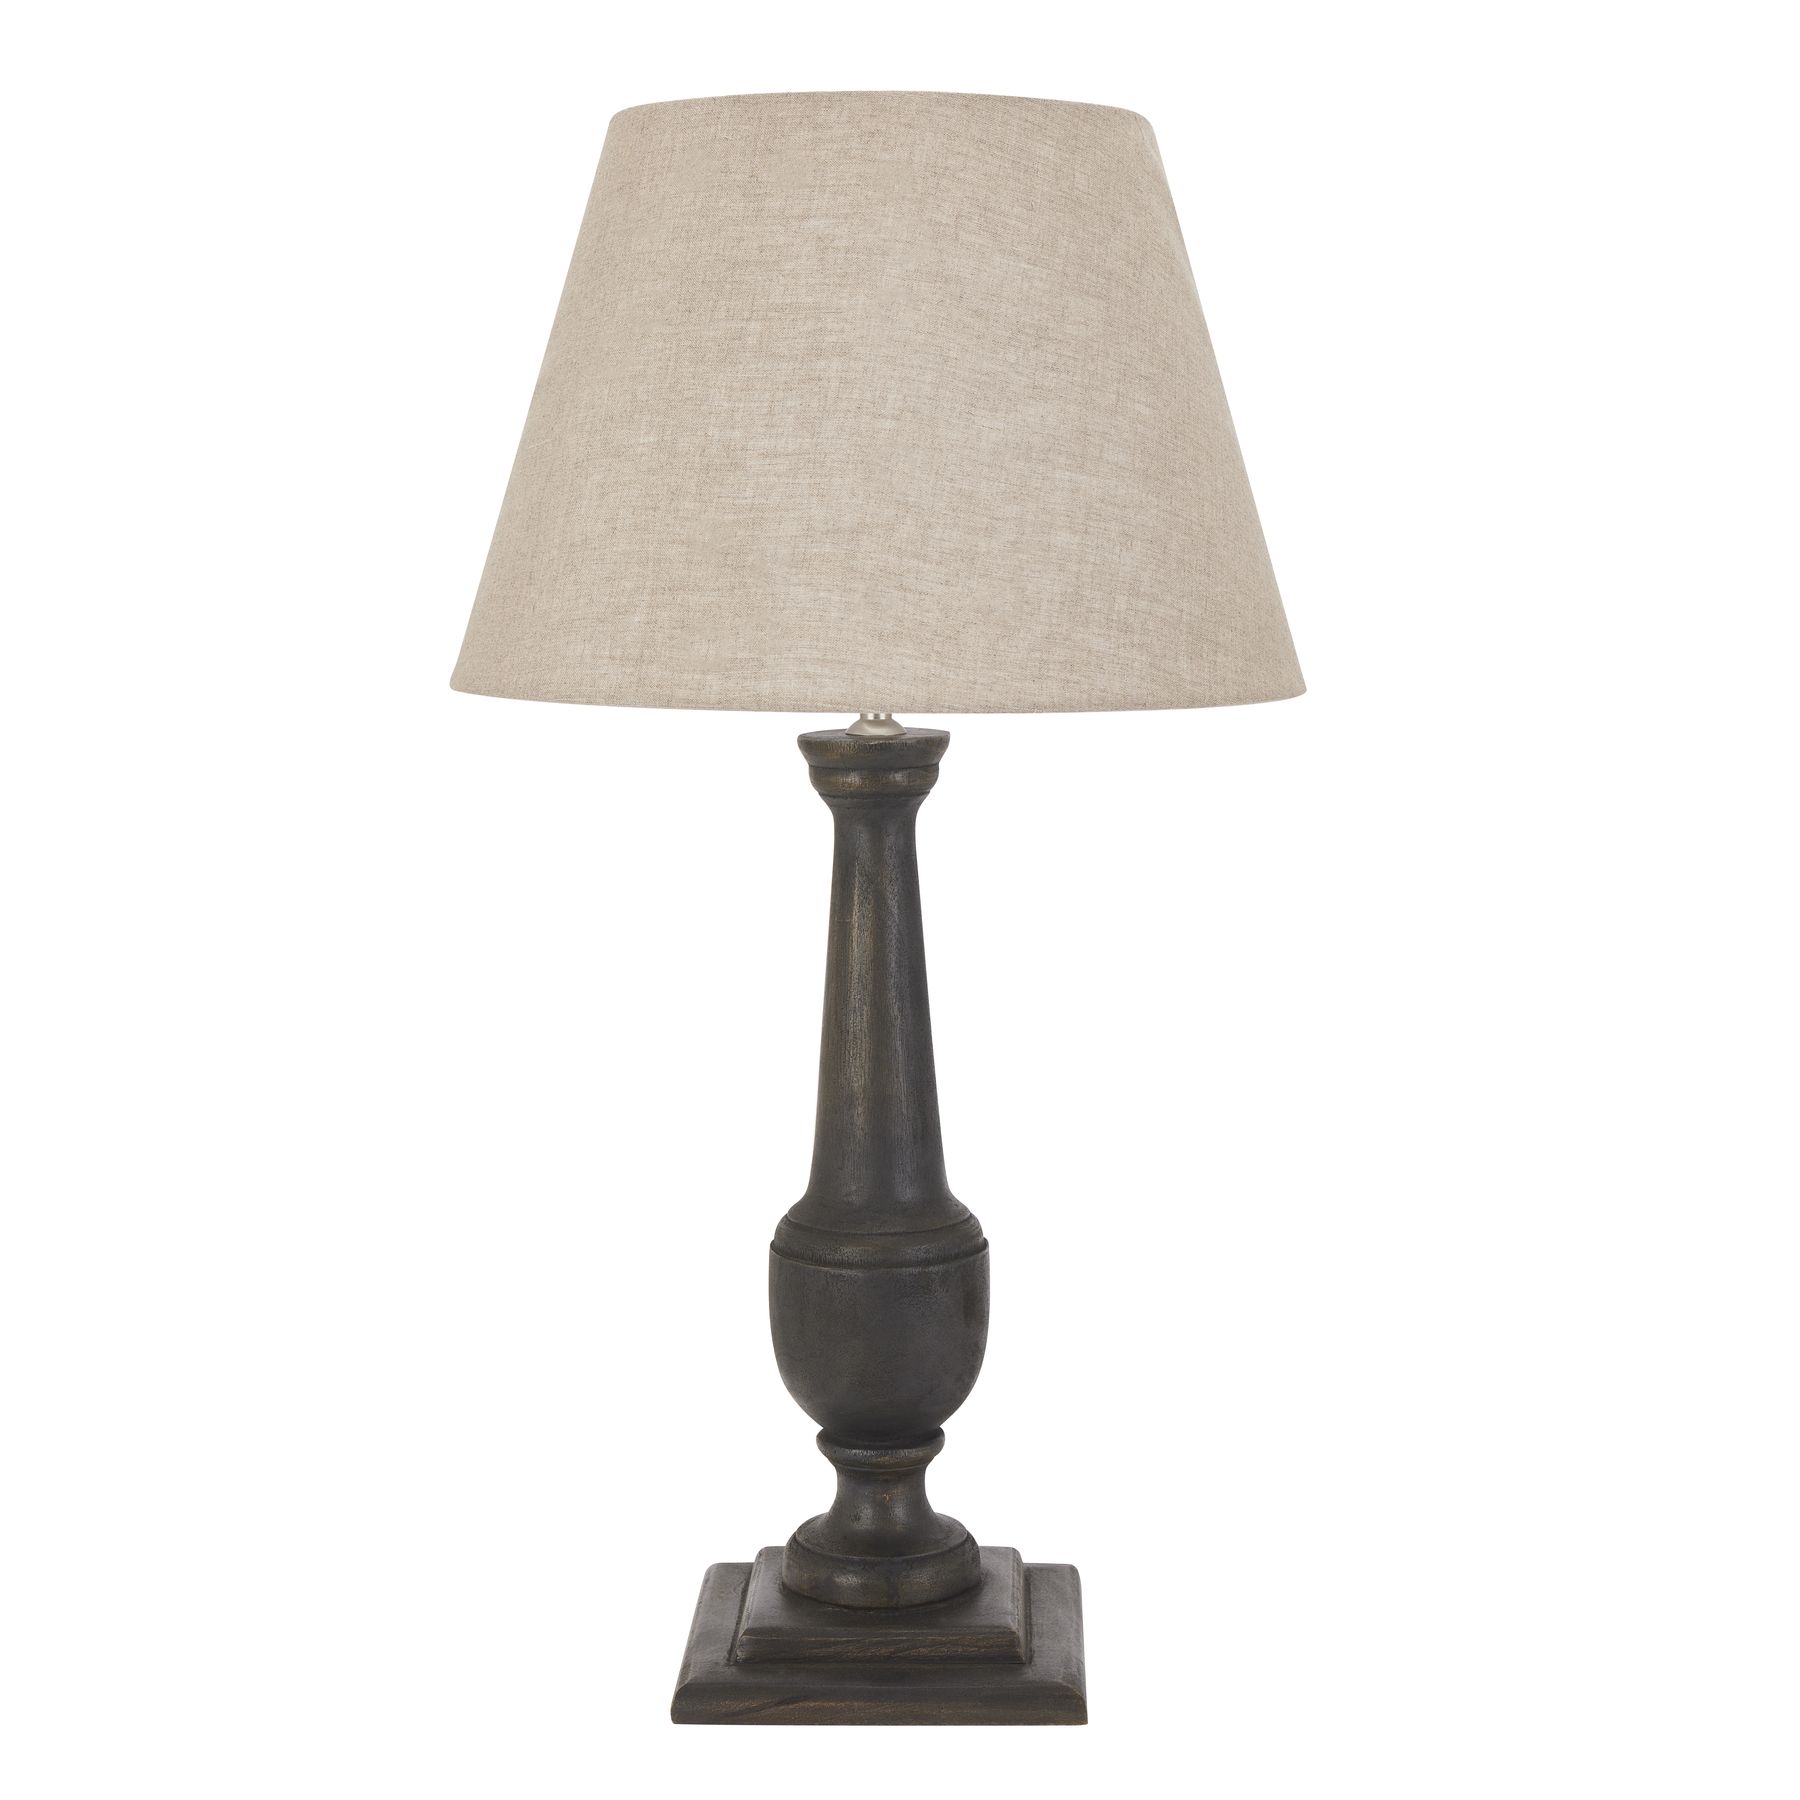 Delaney Grey Goblet Candlestick Lamp With Linen Shade - Image 1